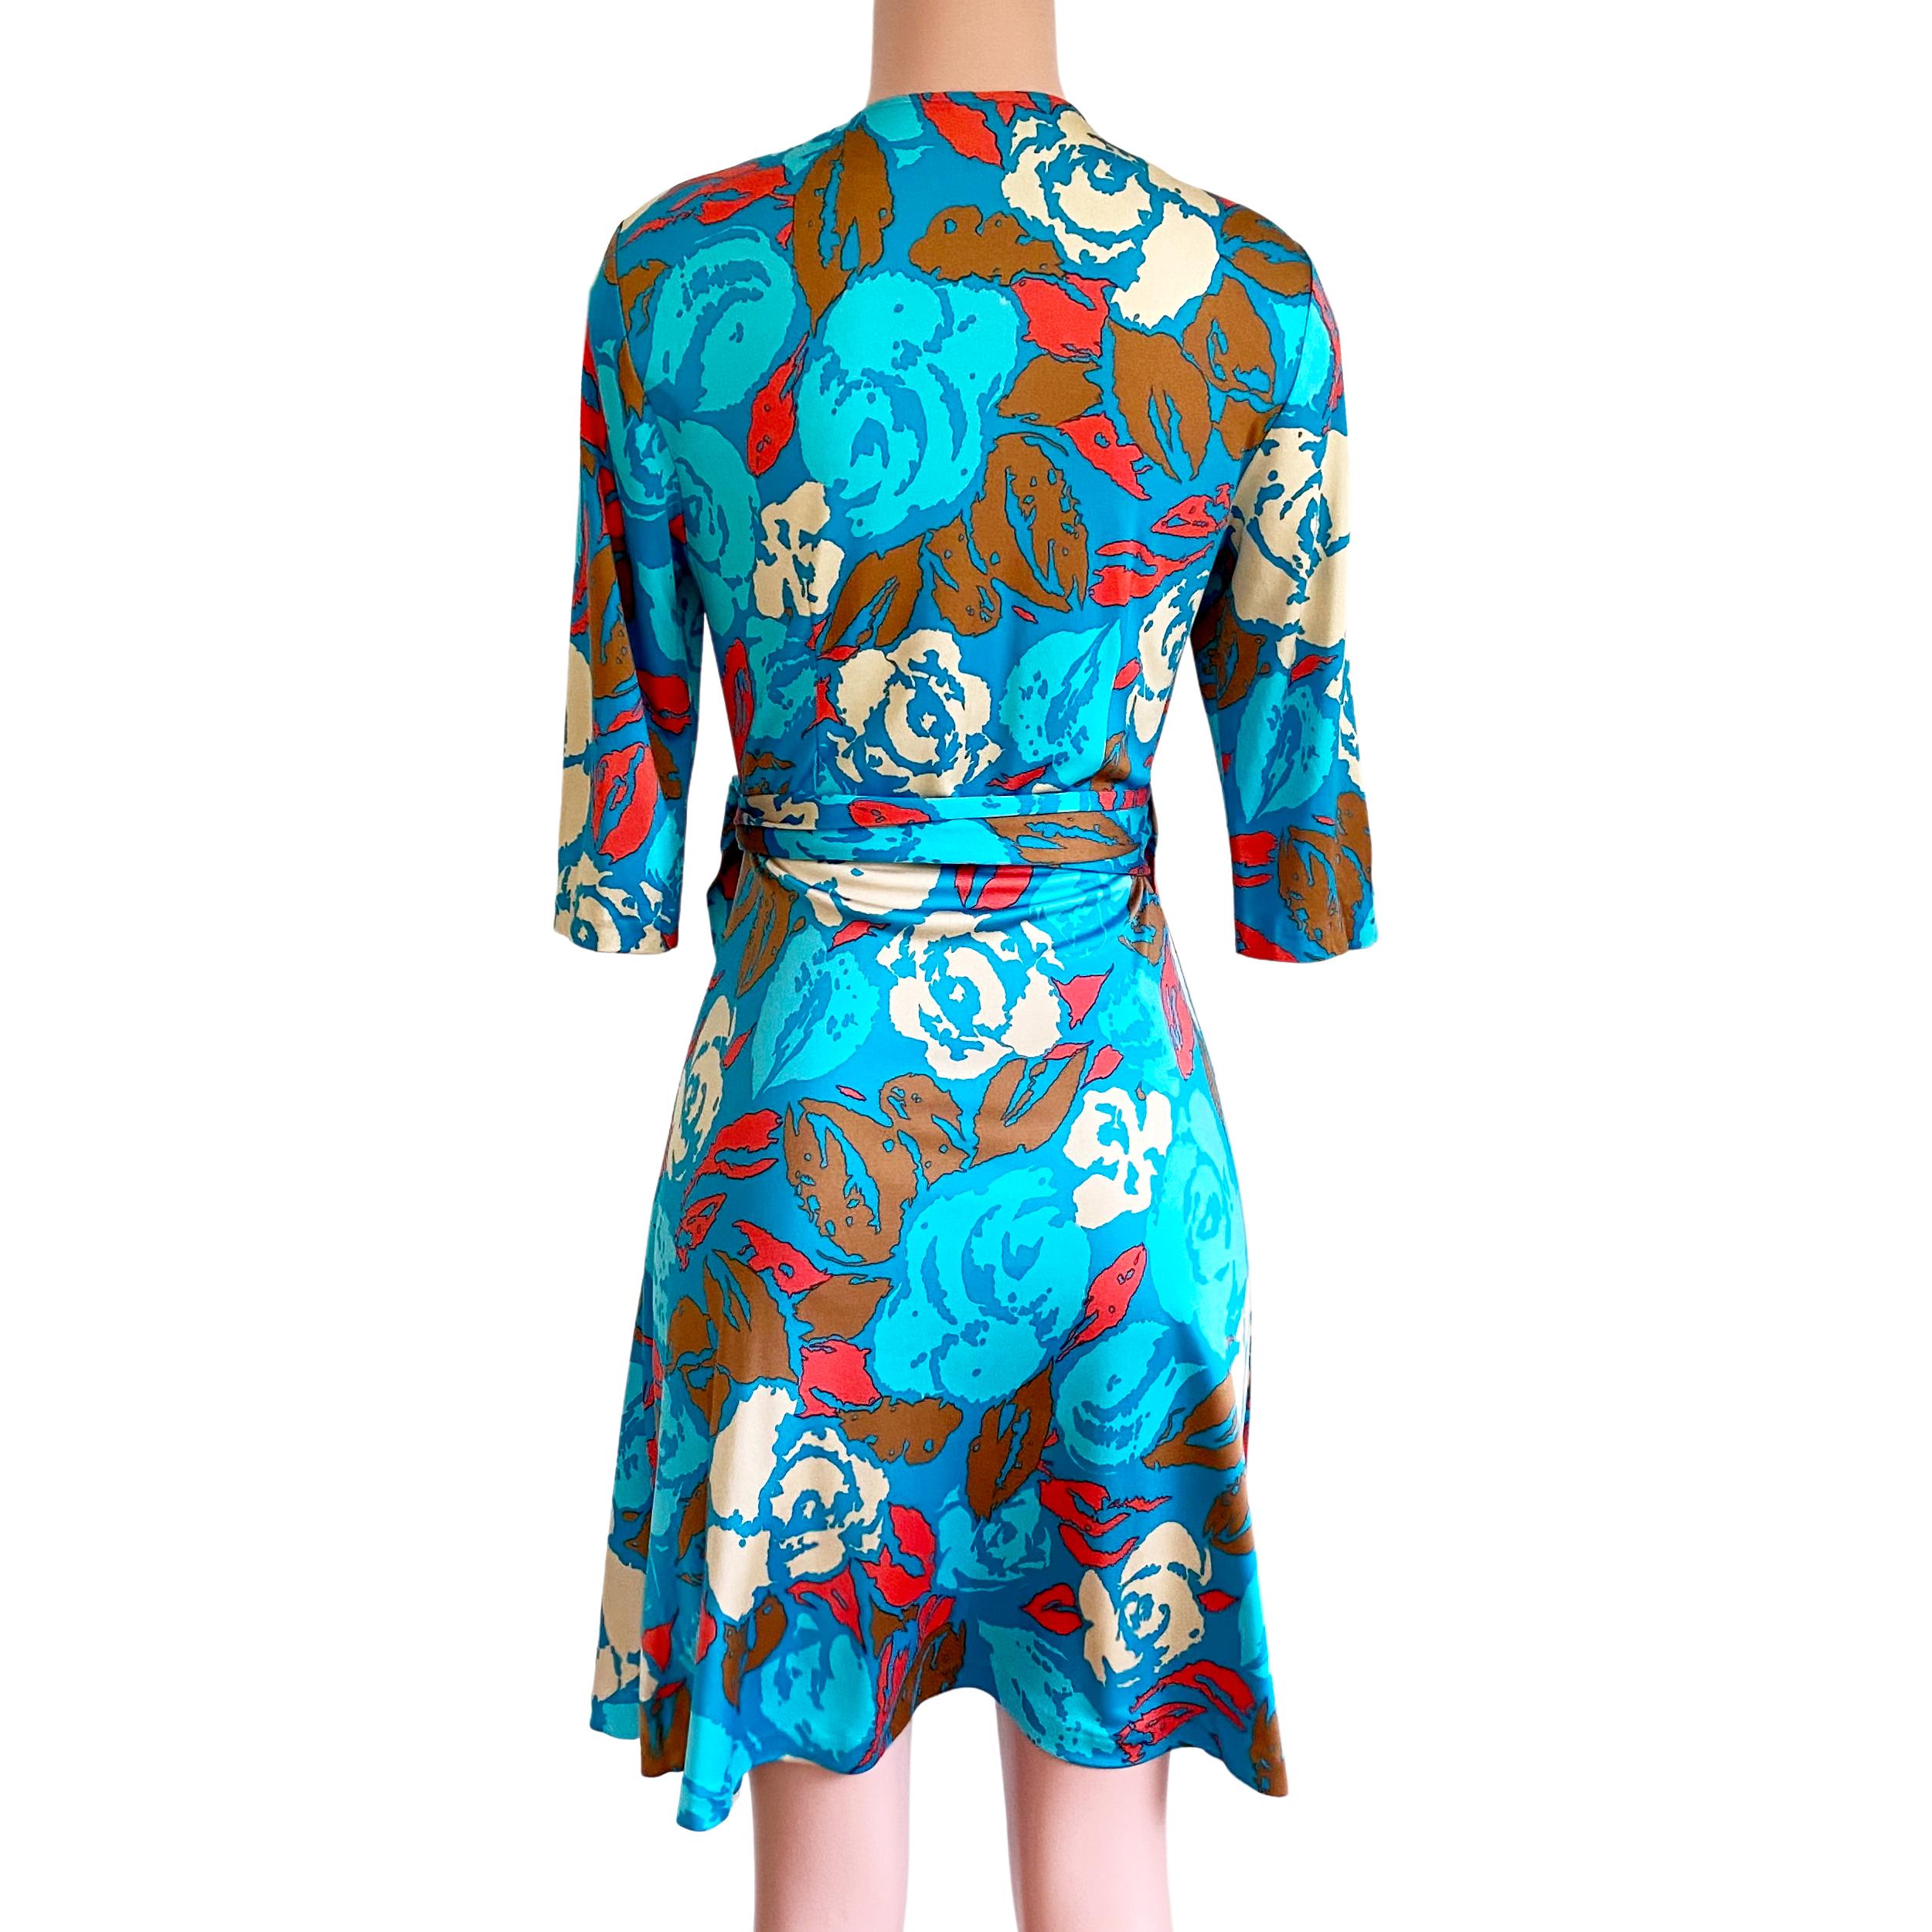 True wrap dress with 3/4 sleeves in an abstract rose print on lake blue turquoise buttery silk jersey.
Authentic FLORA KUNG silk dresses are made in premiere quality, long-filament silk yarn which gives a natural simmering glow and a buttery,